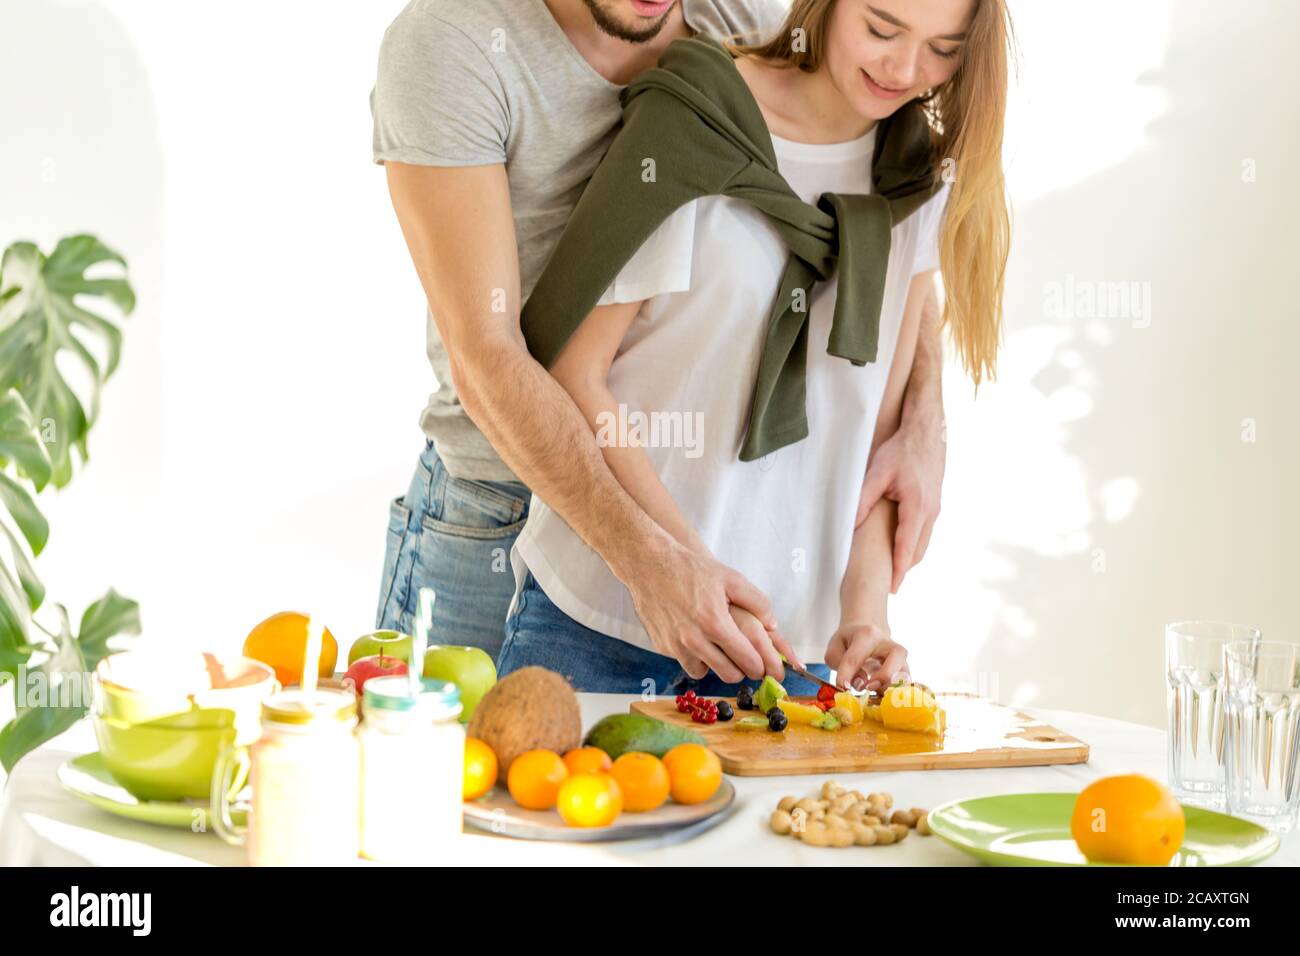 young man and woman wcutting ingredients very carefully. cropped photo Stock Photo